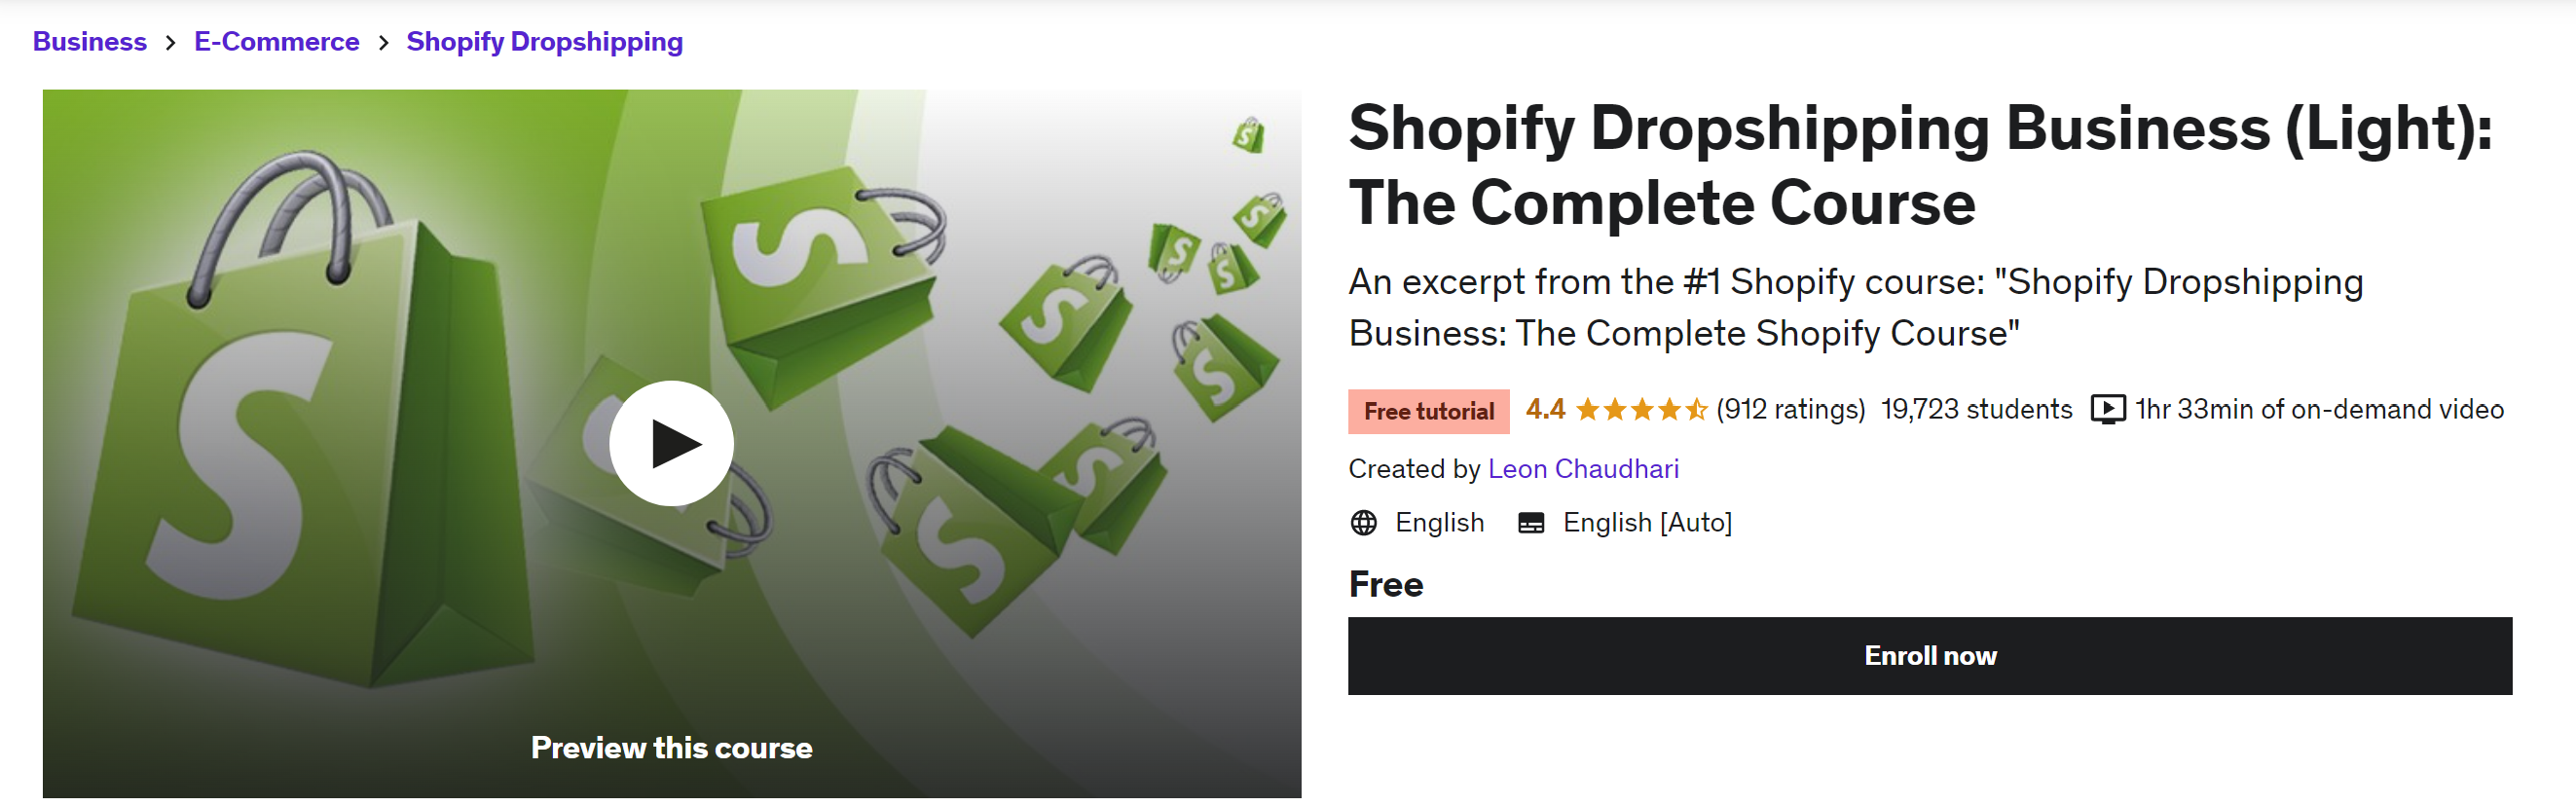 Shopify Dropshipping Business The Complete Course